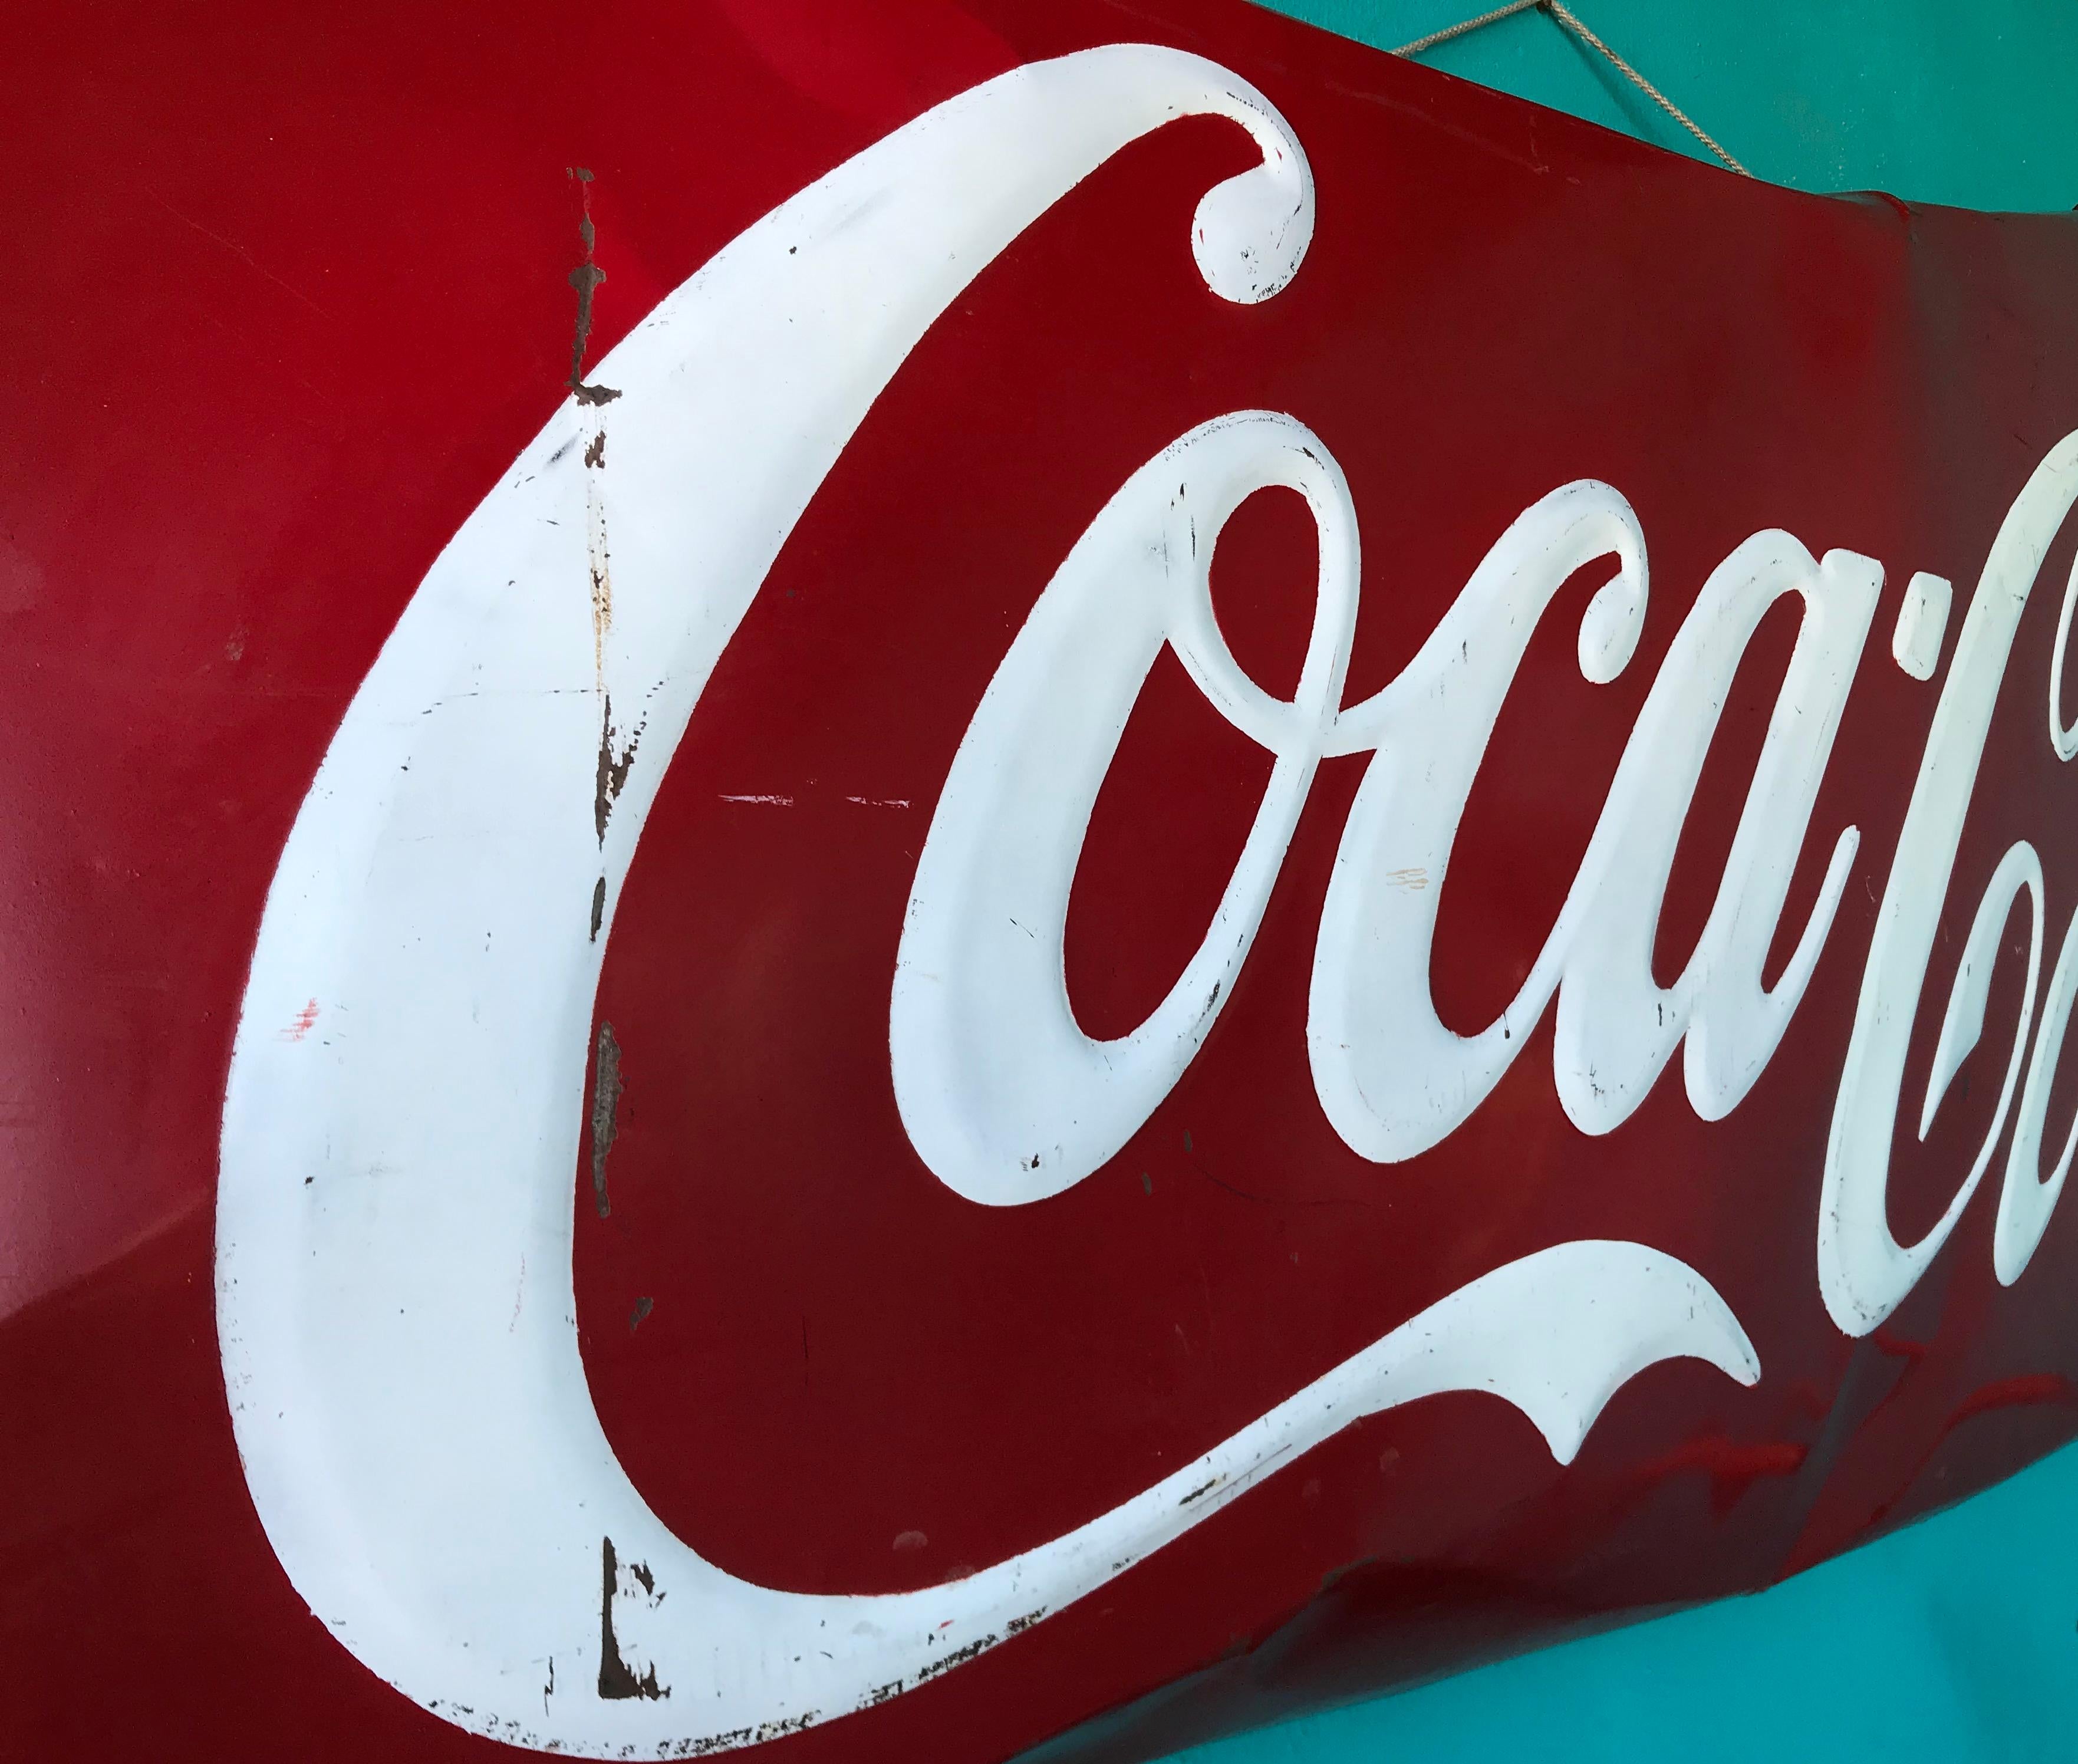 Painted Monumental 7ft Mexican Coca Cola Advertising Porcelain Sign, 1960s